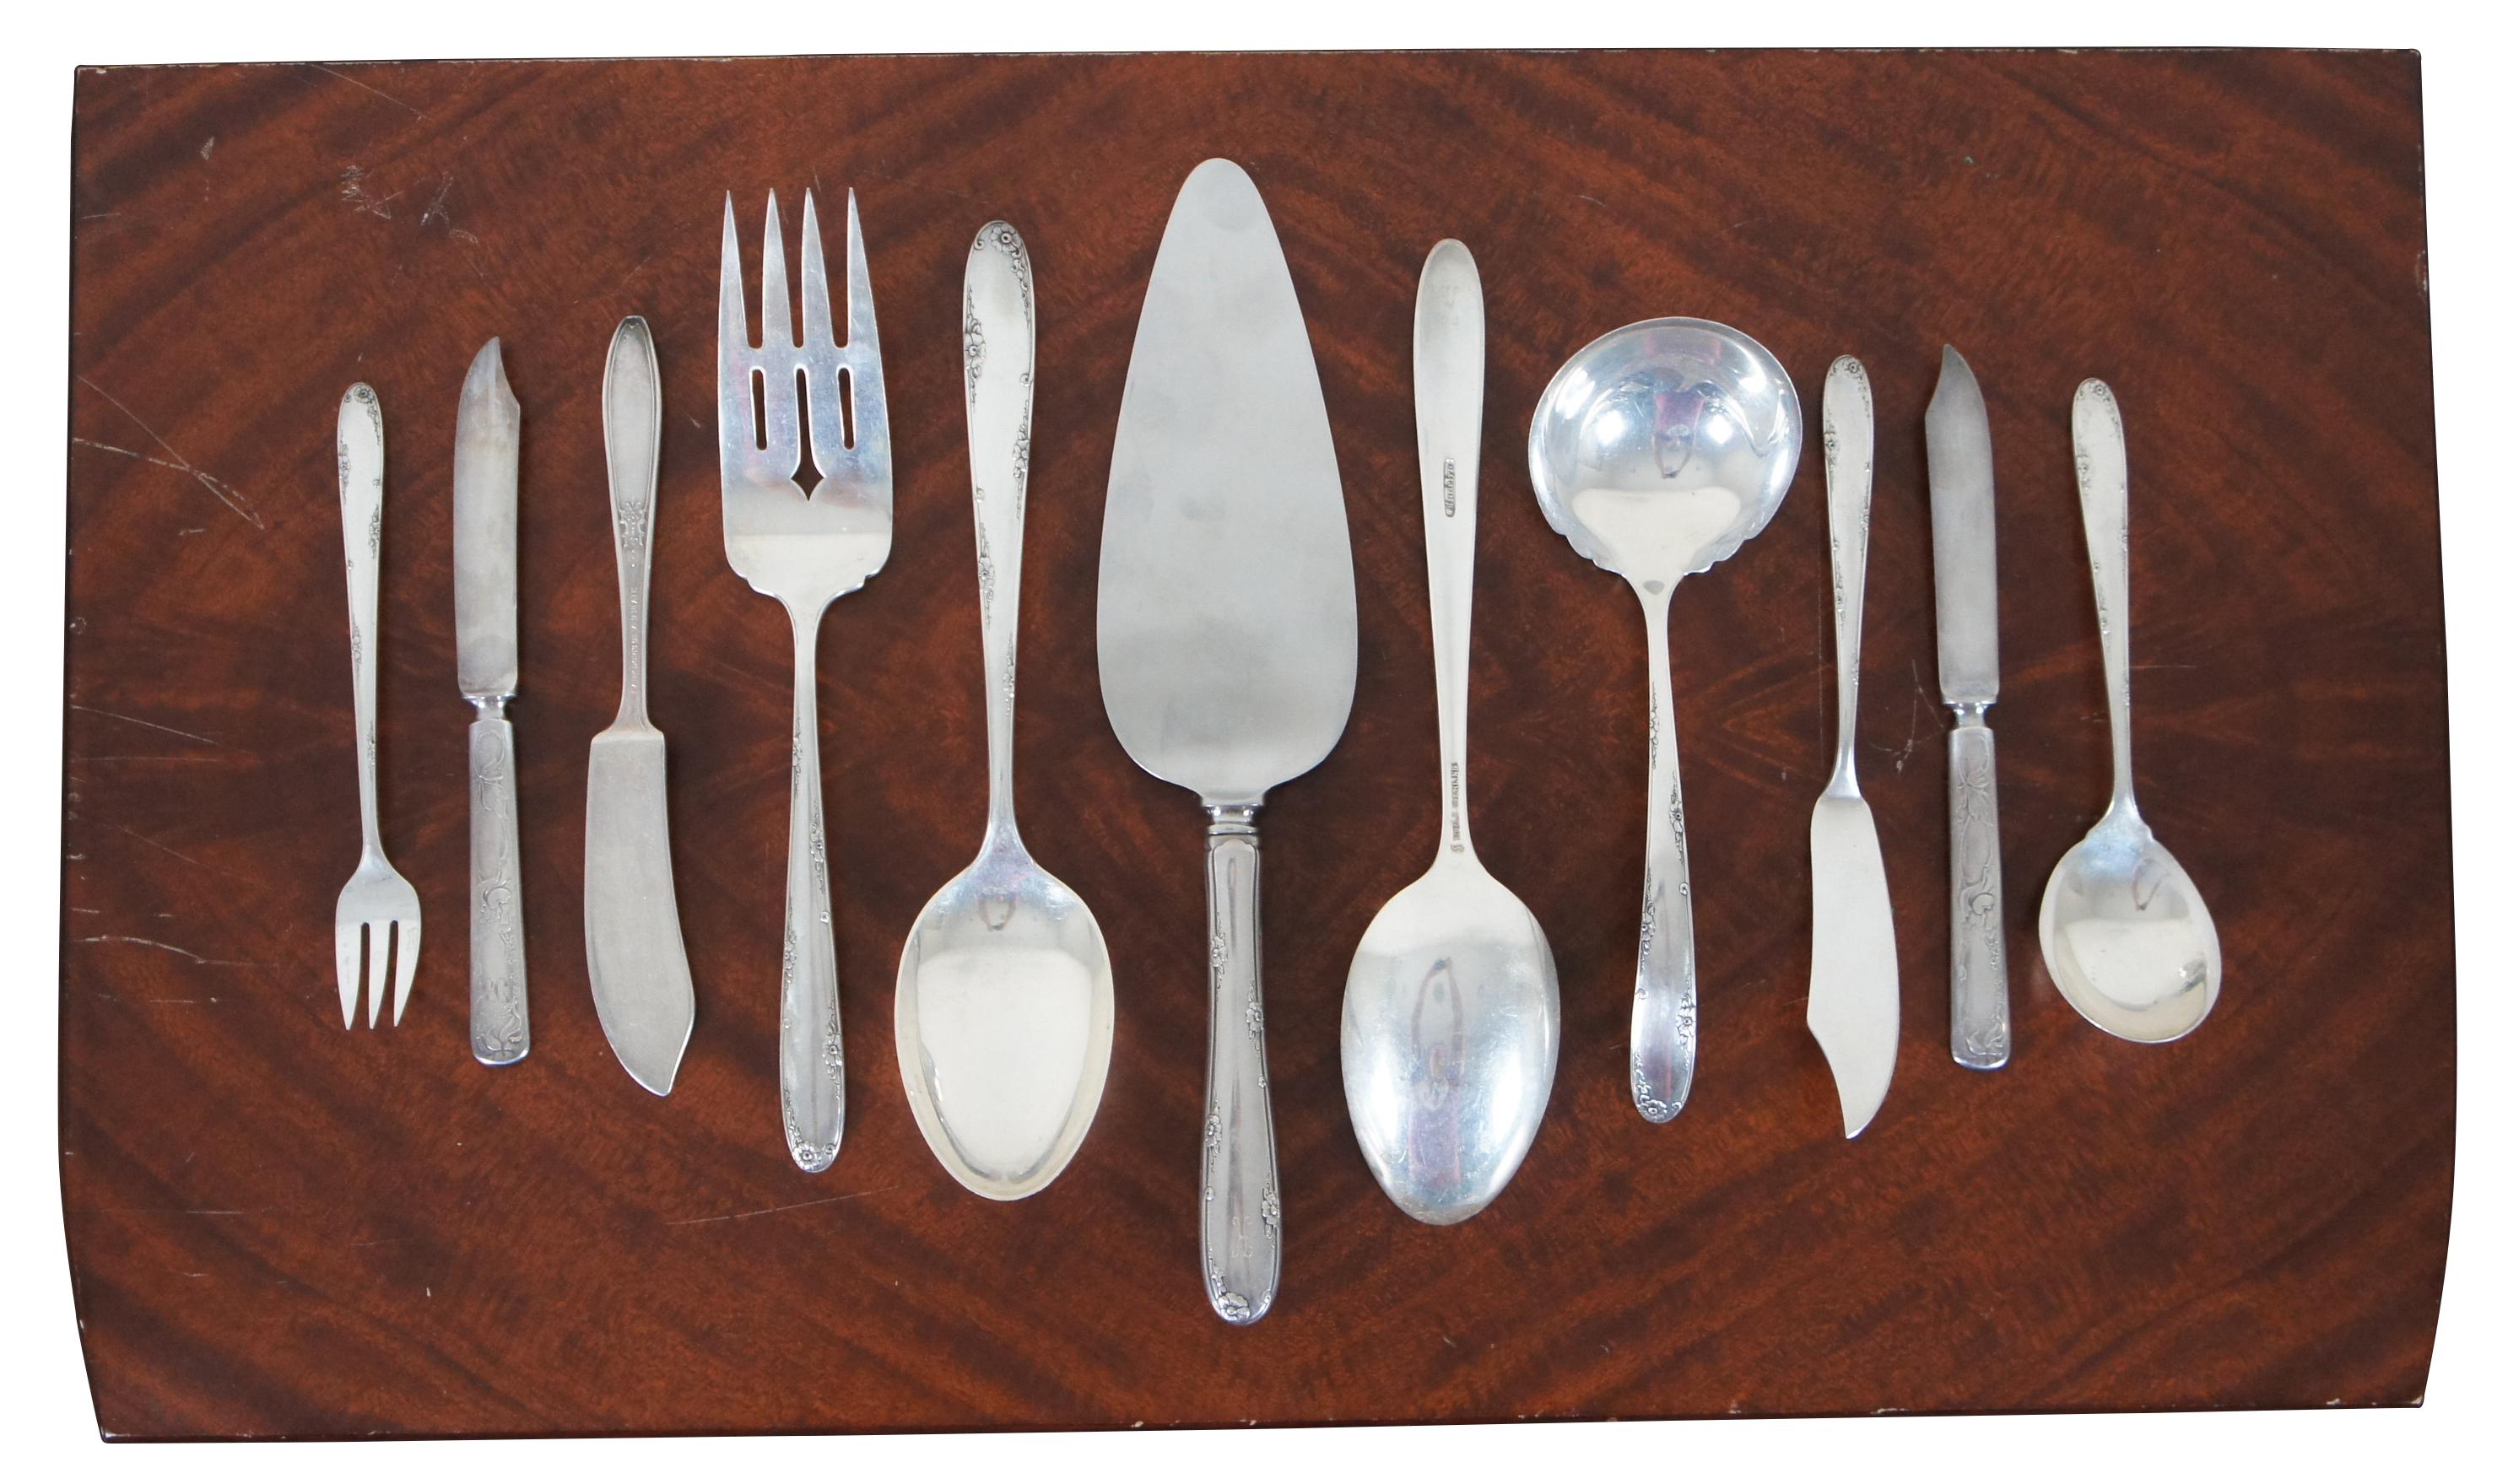 1948 Towle Sterling 68 piece flatware set and wood storage chest in the Madeira pattern, subtly monogrammed with a K. Includes three non-matching silver plate pieces from R. Wallace and Lady Doris.

Measures: Chest - 19.75” x 12” x 3.75” / 8 Table